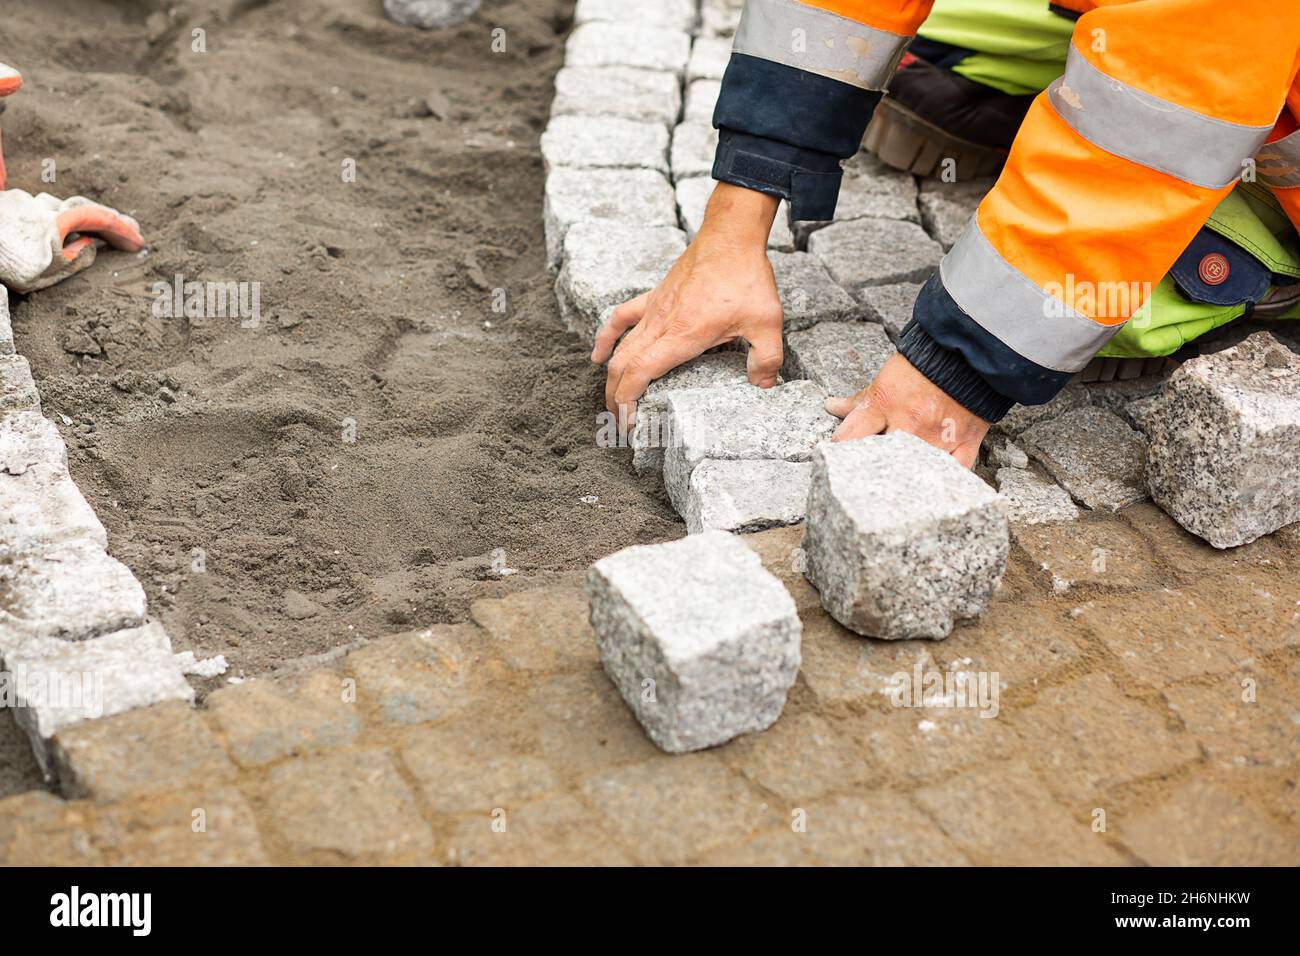 Maintenance work on paving with interlocking paving stones. Unrecognizable persons with building materials in hand, Concrete products, building indust Stock Photo